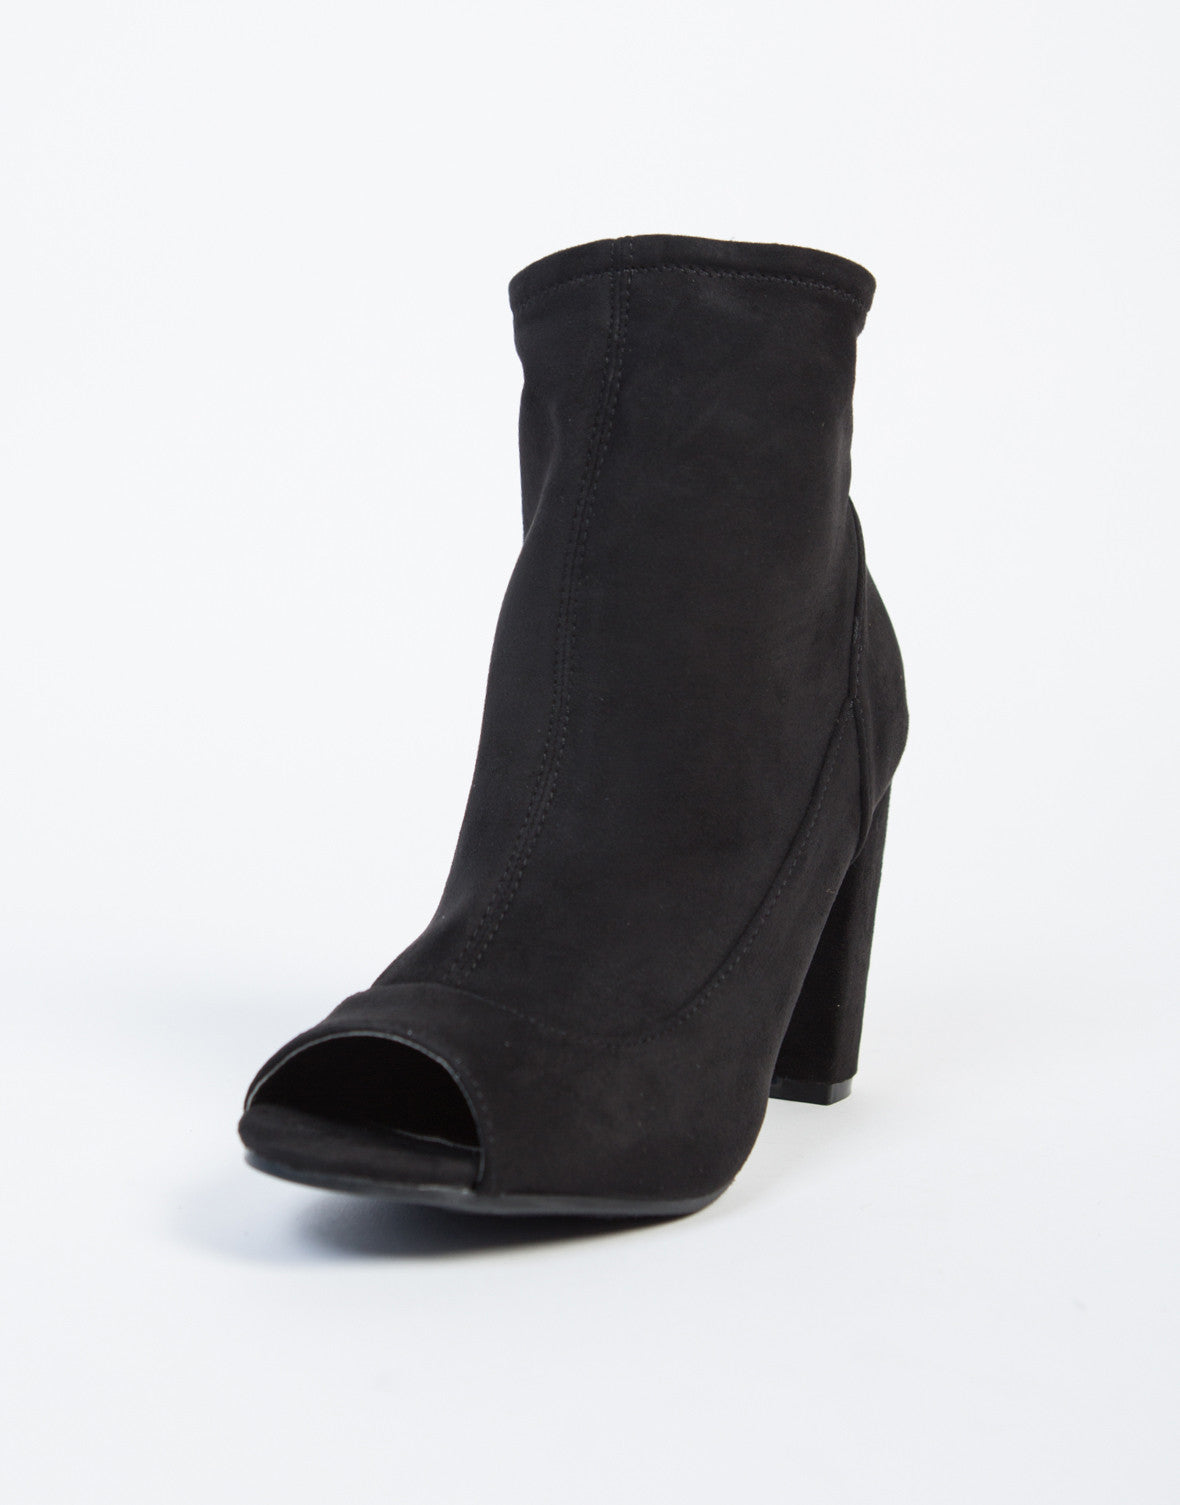 Peekaboo Suede Ankle Boots - Suede Ankle Boots - Peep Toe Boots – 2020AVE